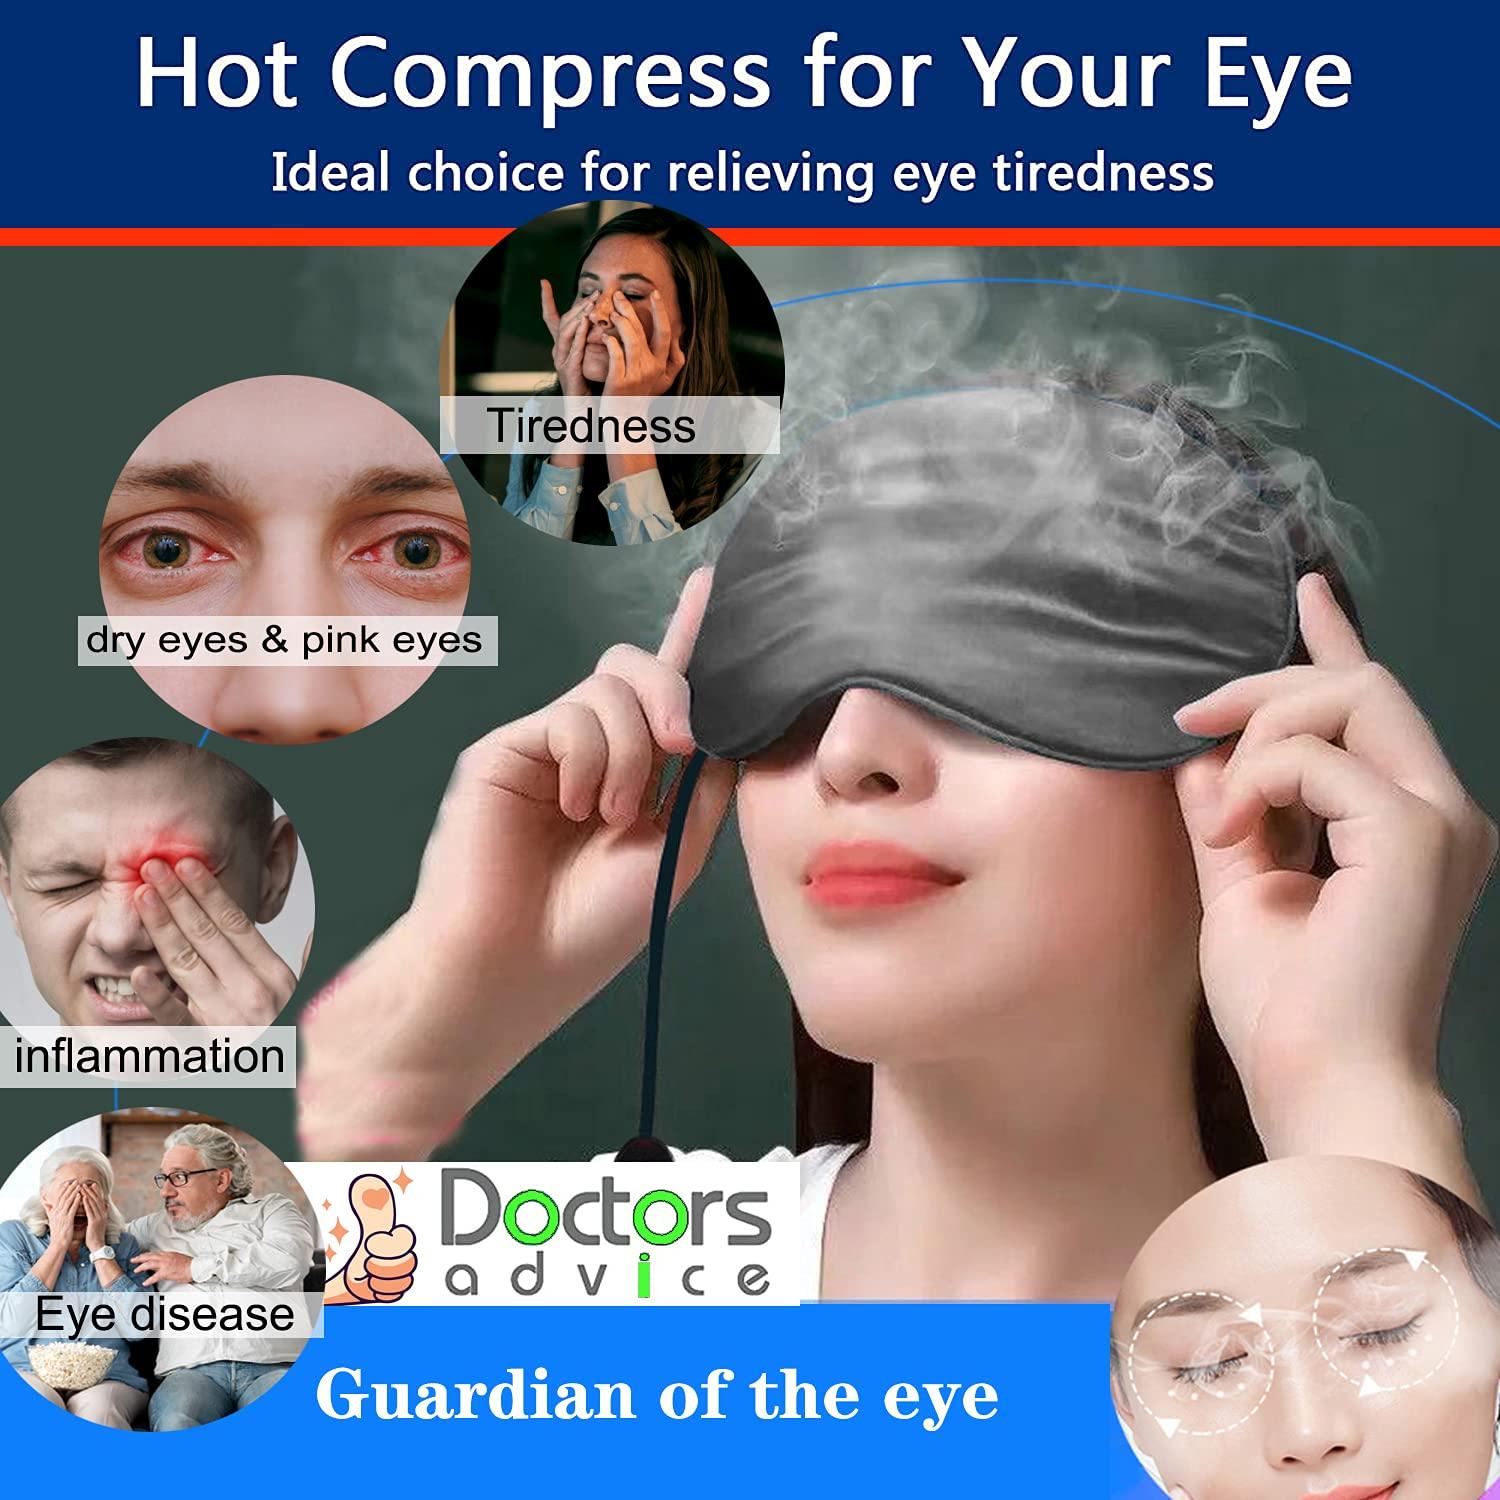 Warming Eye Compress Dry Eye Syndrome Hot Compress for Styes - Dry